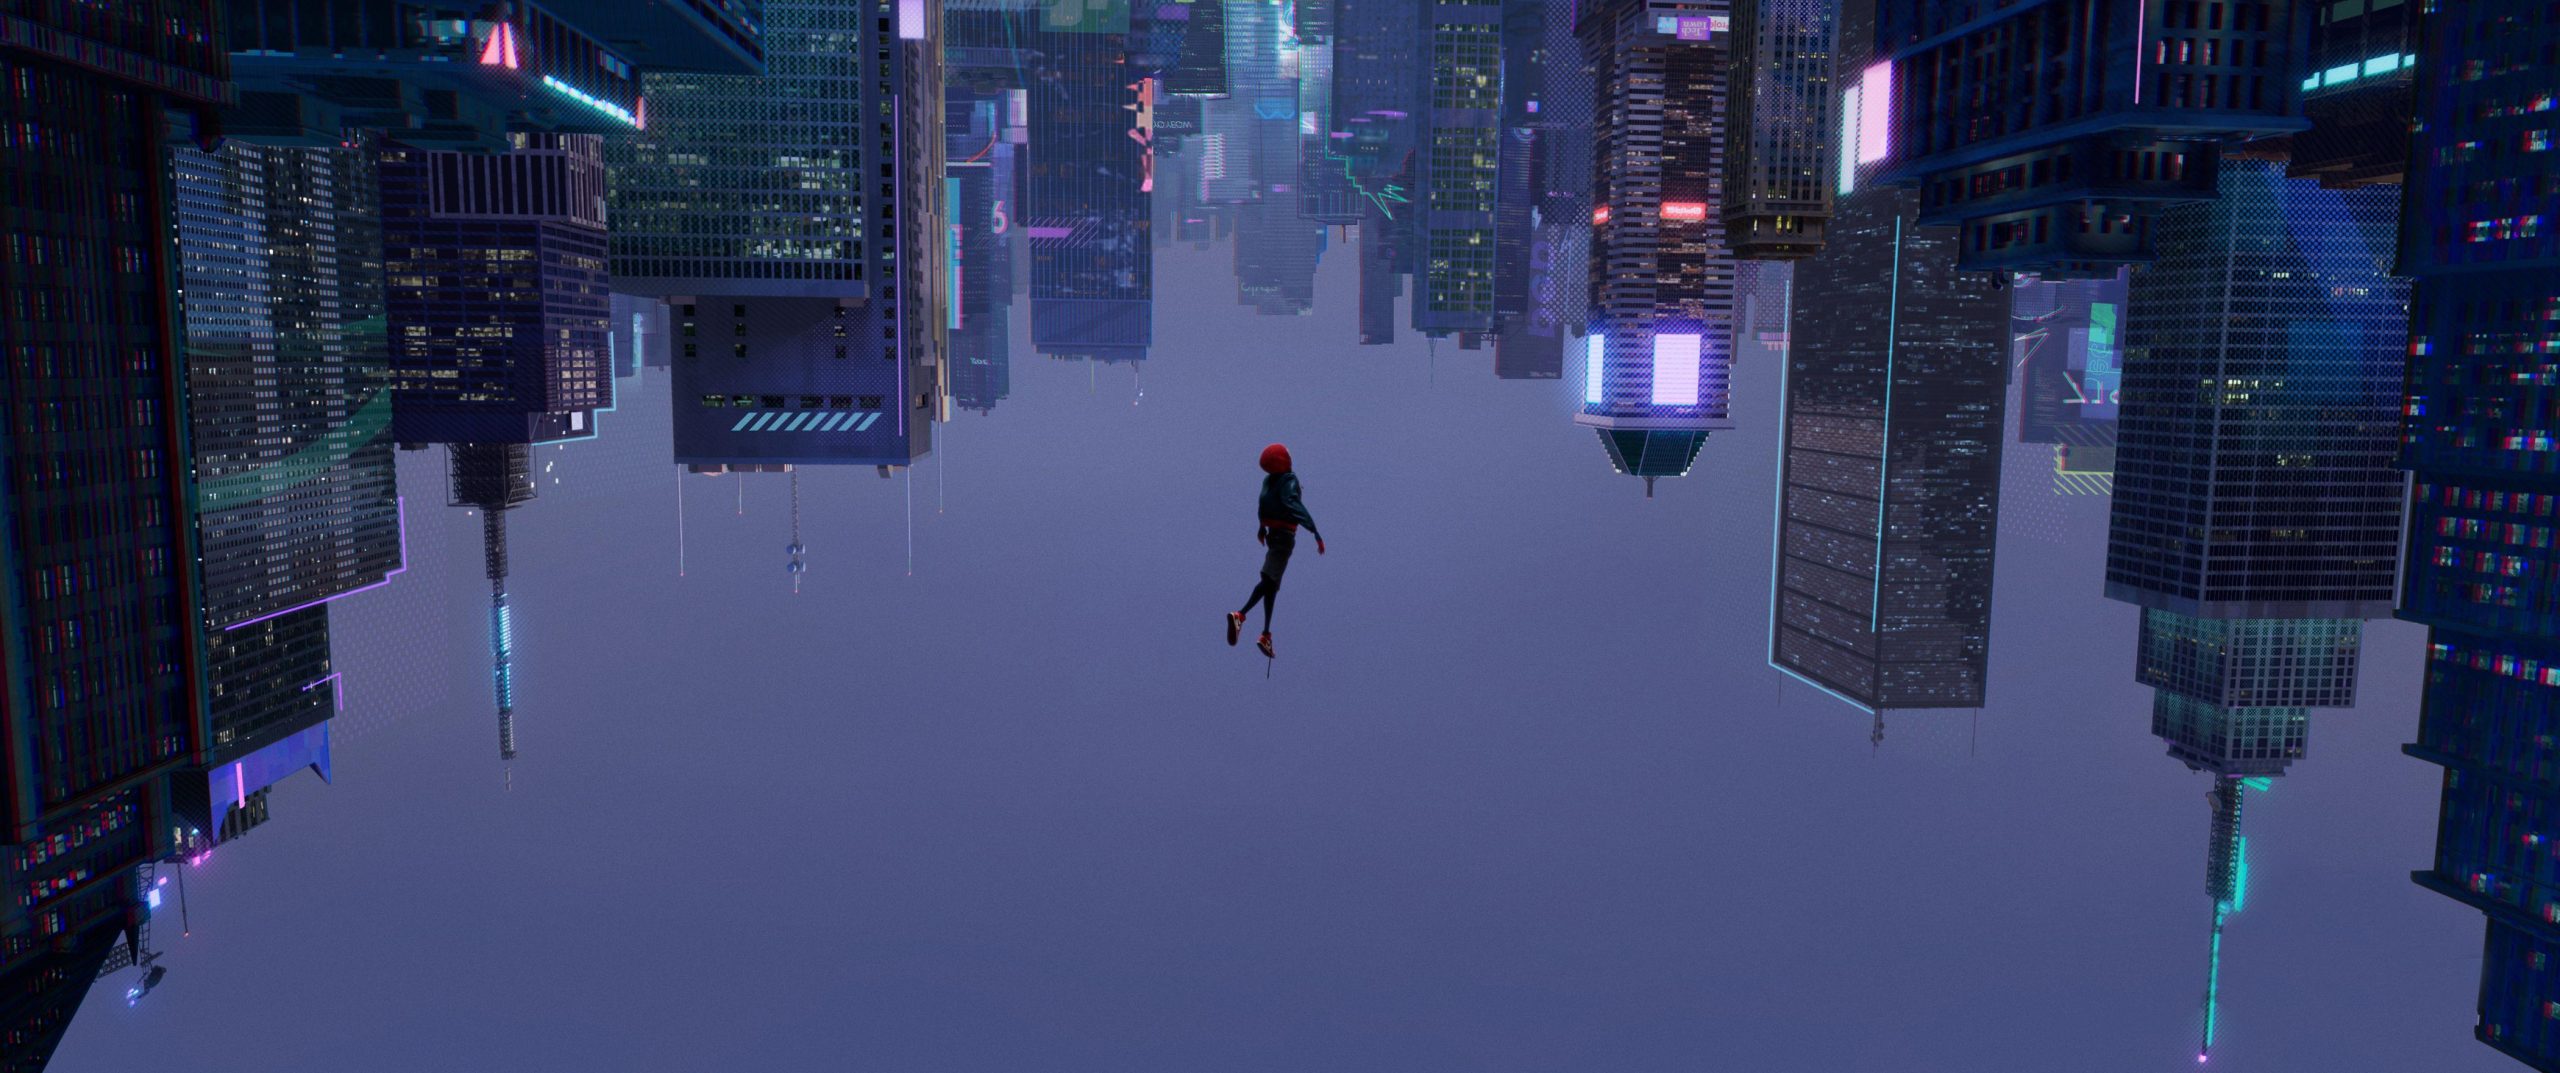 Miles Morales Leap Of Faith Hd Wallpapers For Pc, Miles Morales Leap Of Faith, Movies